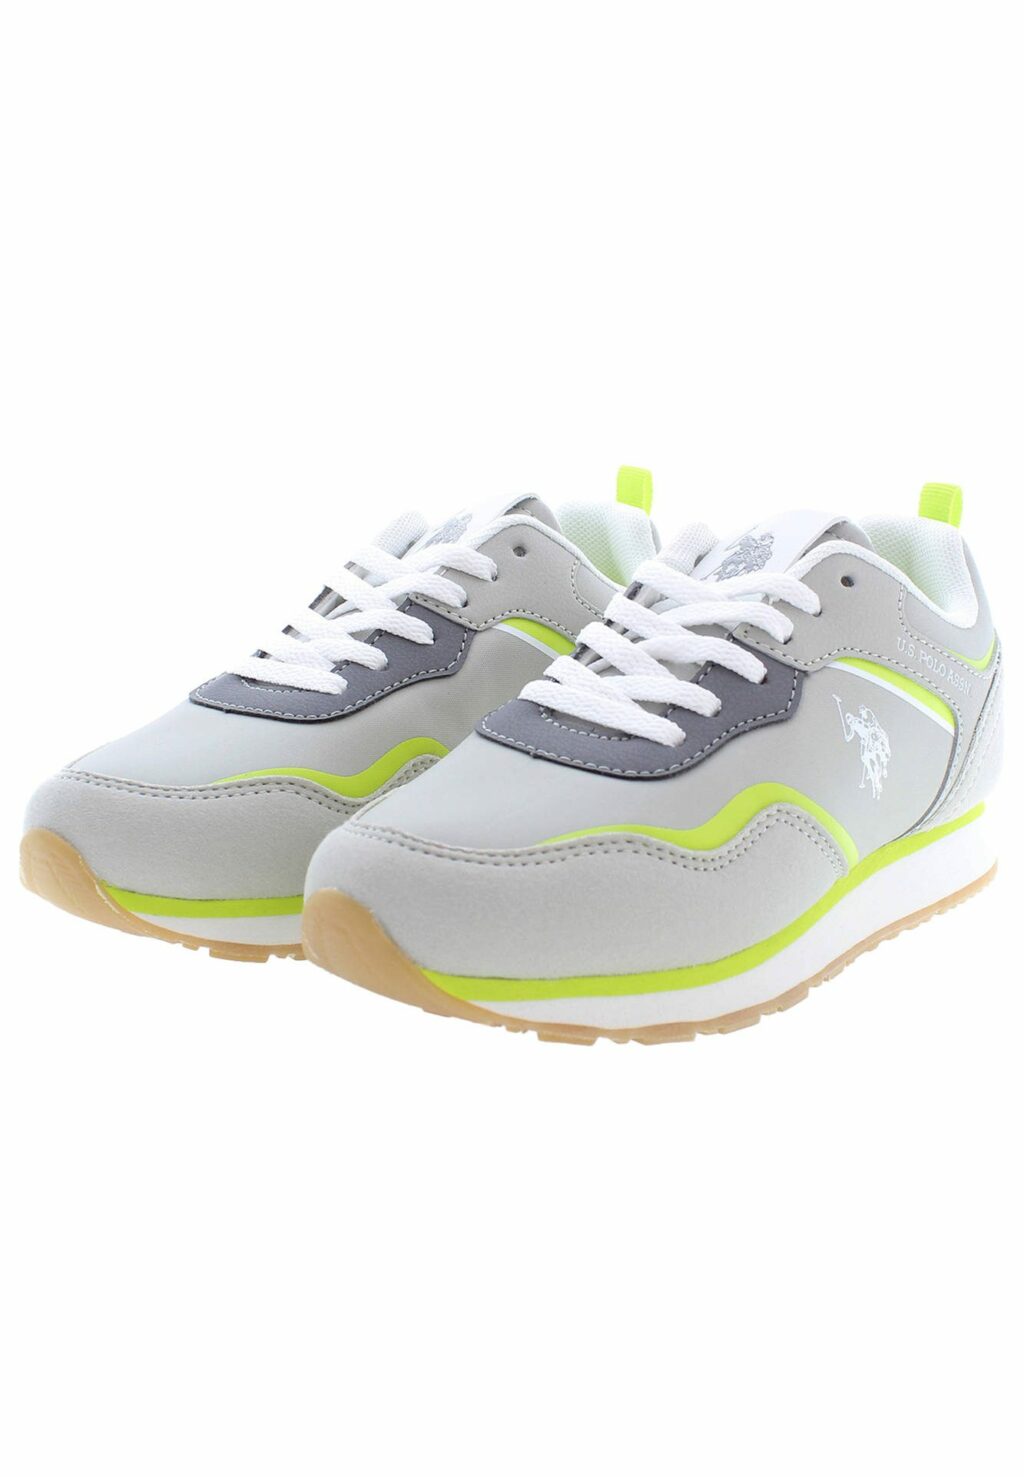 US POLO BEST PRICE SPORTS SHOES FOR KIDS NOBIK010K3NH1_GRIGIO_LGR-LGE02